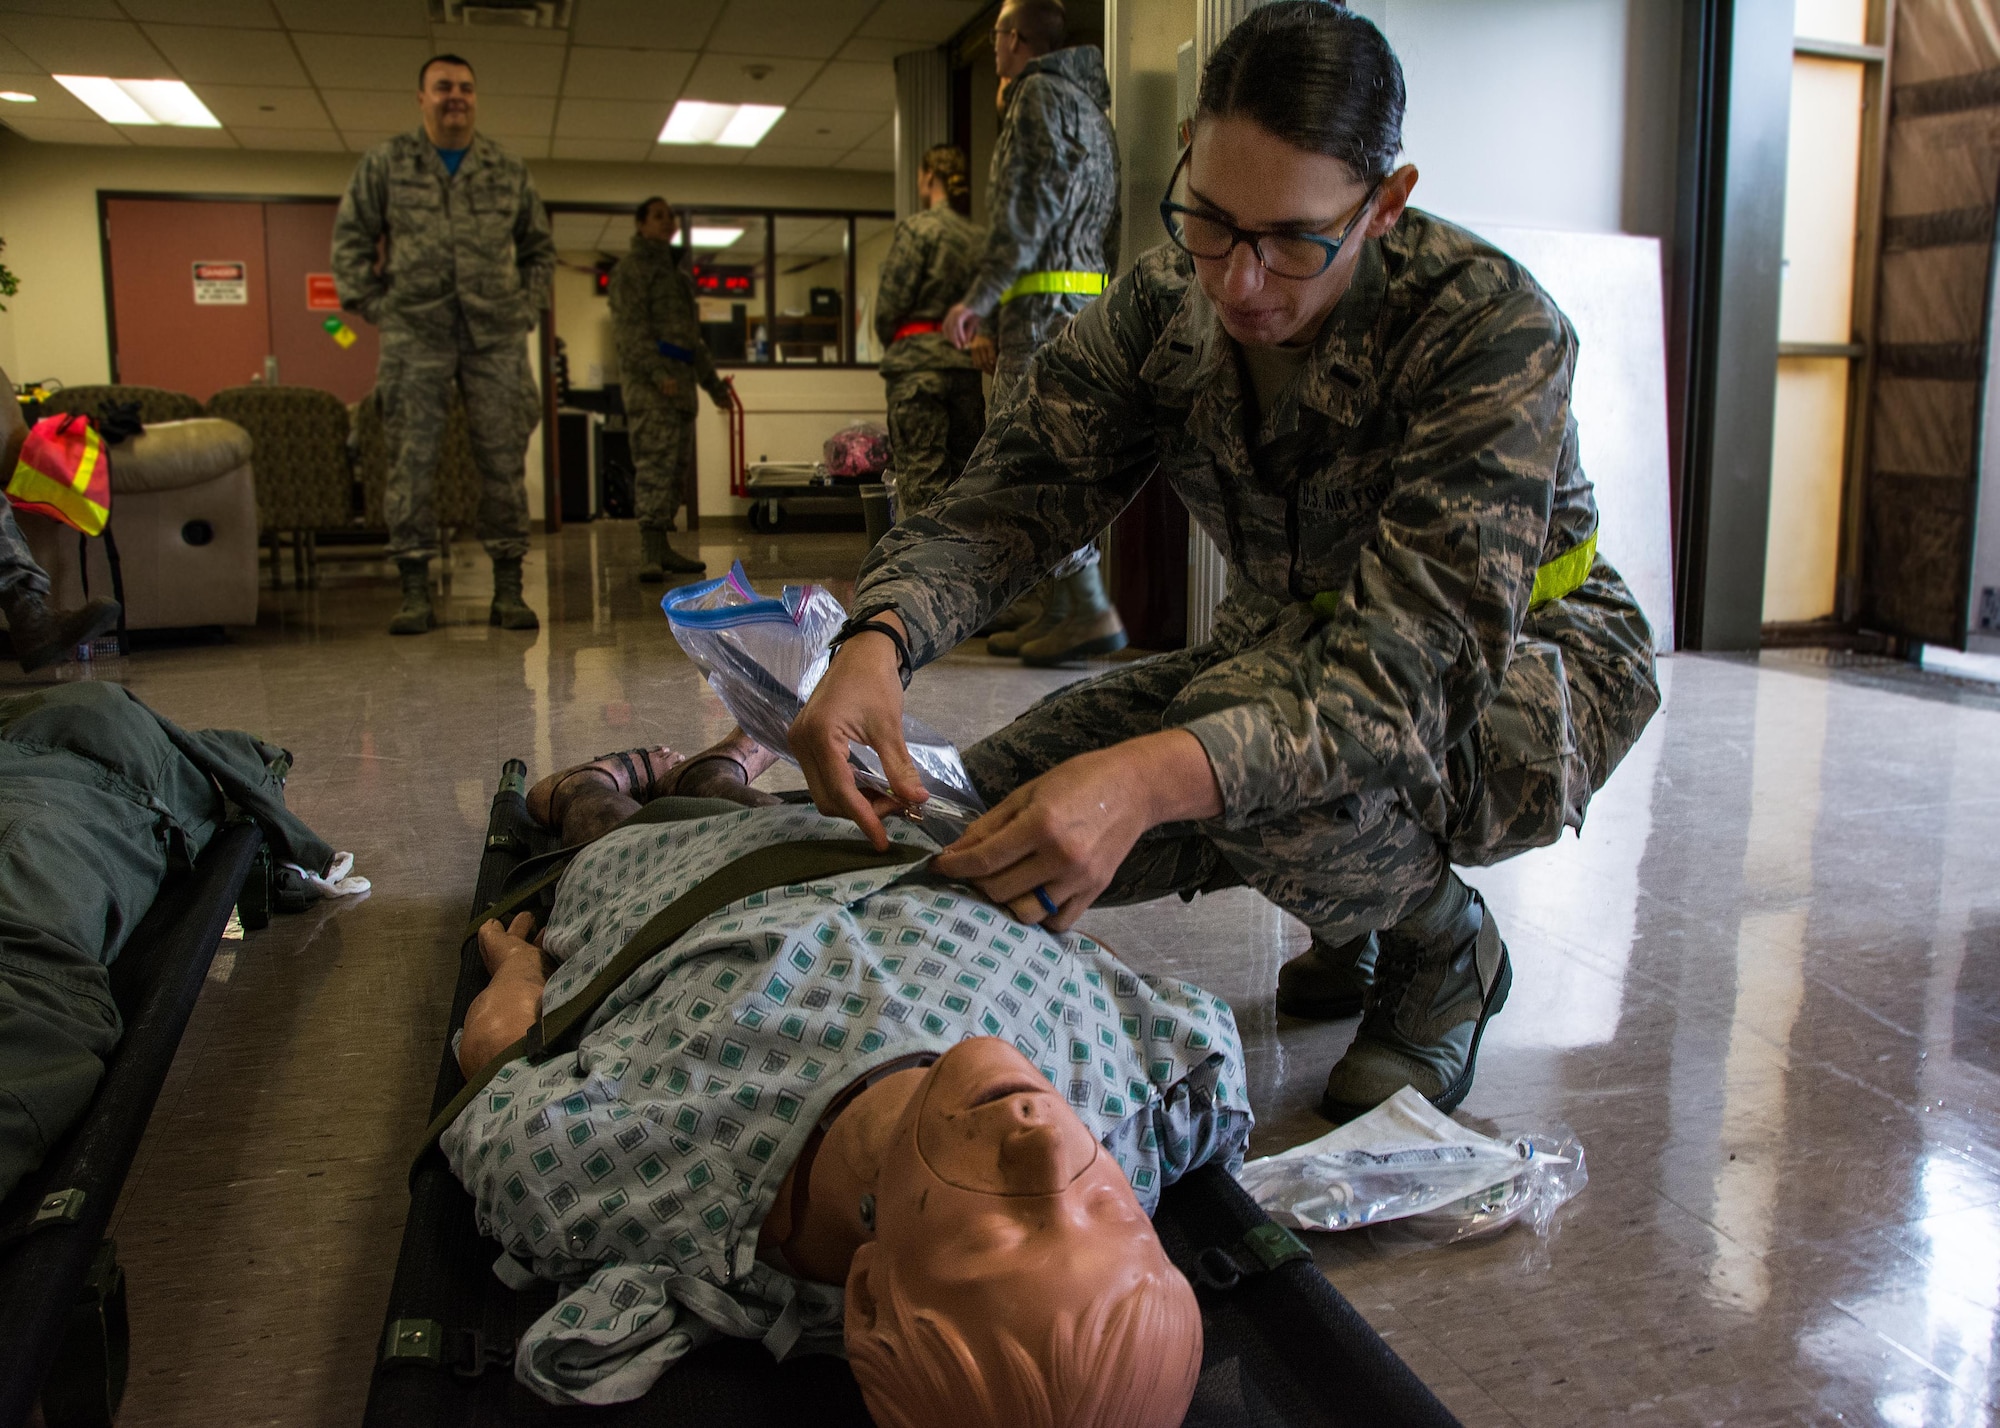 1st Lt. Andrea Nofi, 60th Inpatient Squadron nurse, stages a medical manikin at David Grant U.S. Air Force Medical Center at Travis Air Force Base, Calif., on March 24, 2017. Members of the 60th IPTS participated in the Air Force Reserve exercise Patriot Delta, providing enroute patient care and staging the medical manikins. (U.S. Air Force photo by Staff Sgt. Daniel Phelps)